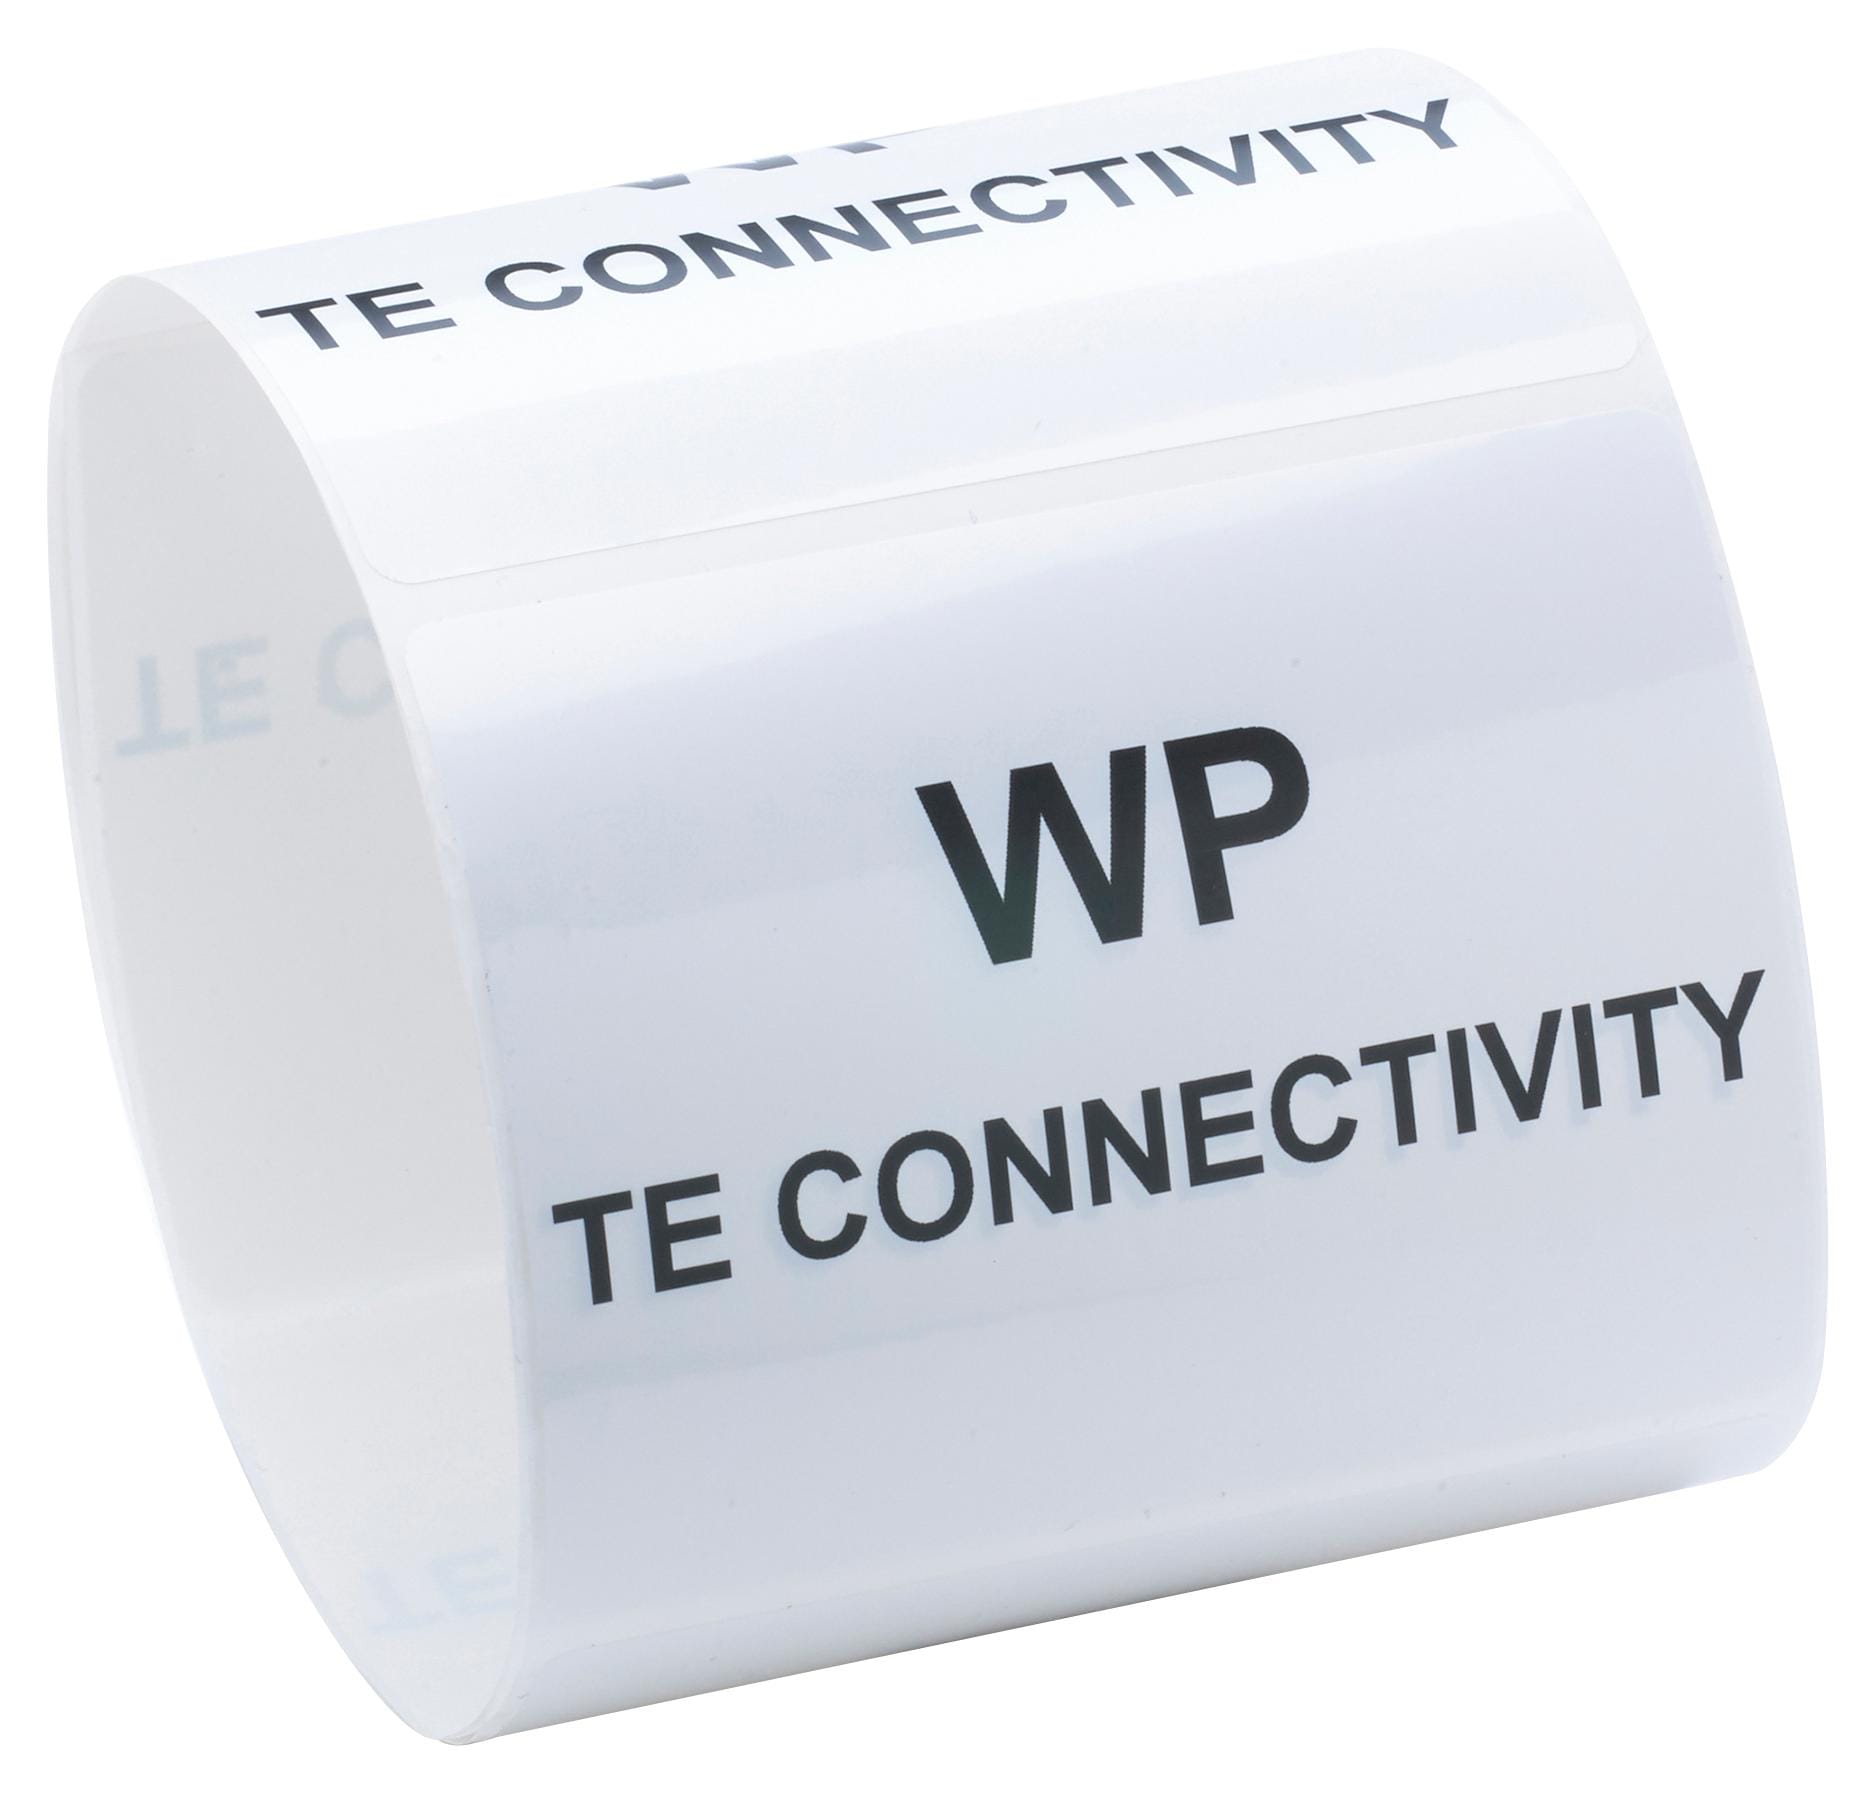 WP-699254-5-9 LABEL, POLYESTER, WHITE, 25.4MM X 69.9MM TE CONNECTIVITY